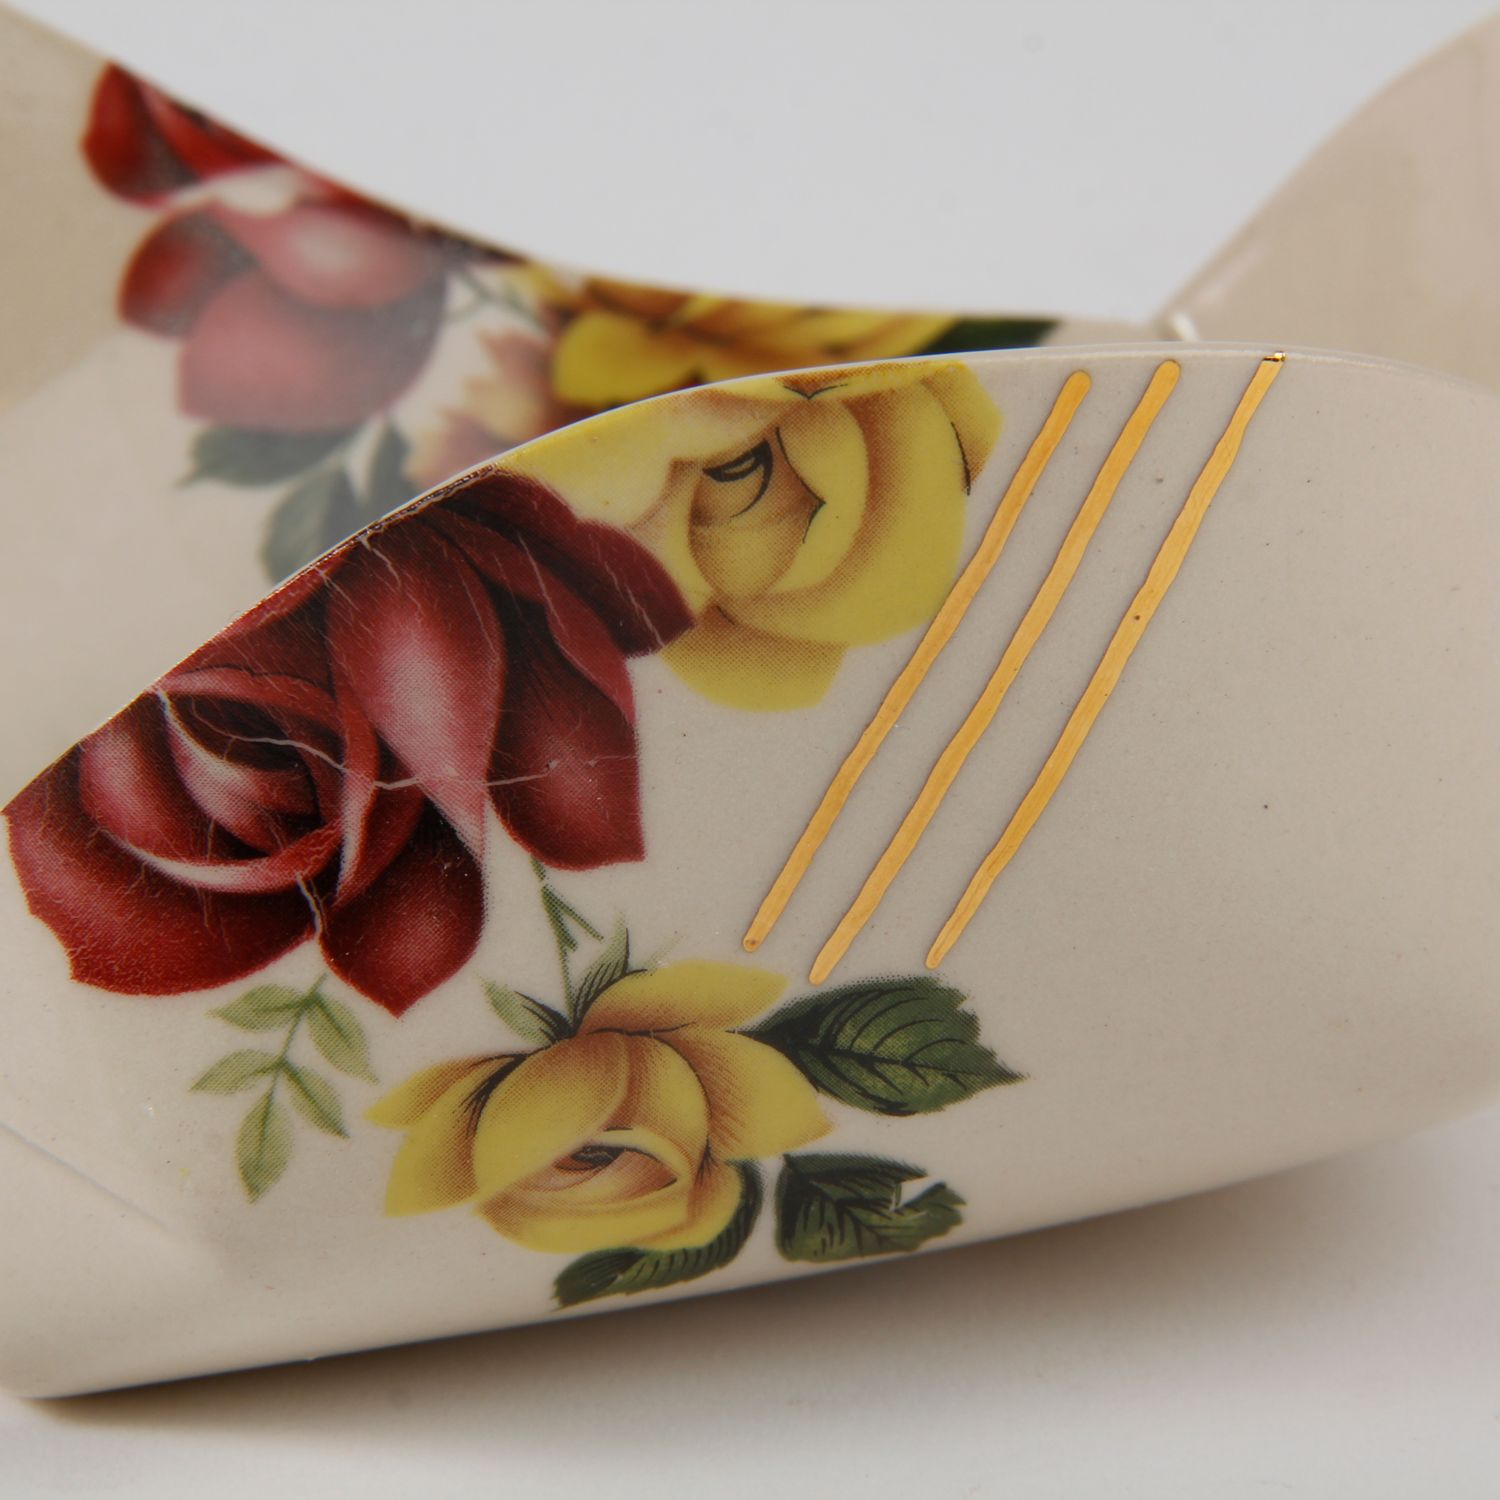 Natalie Waddell: X-Large Floral Bowl Product Image 4 of 7